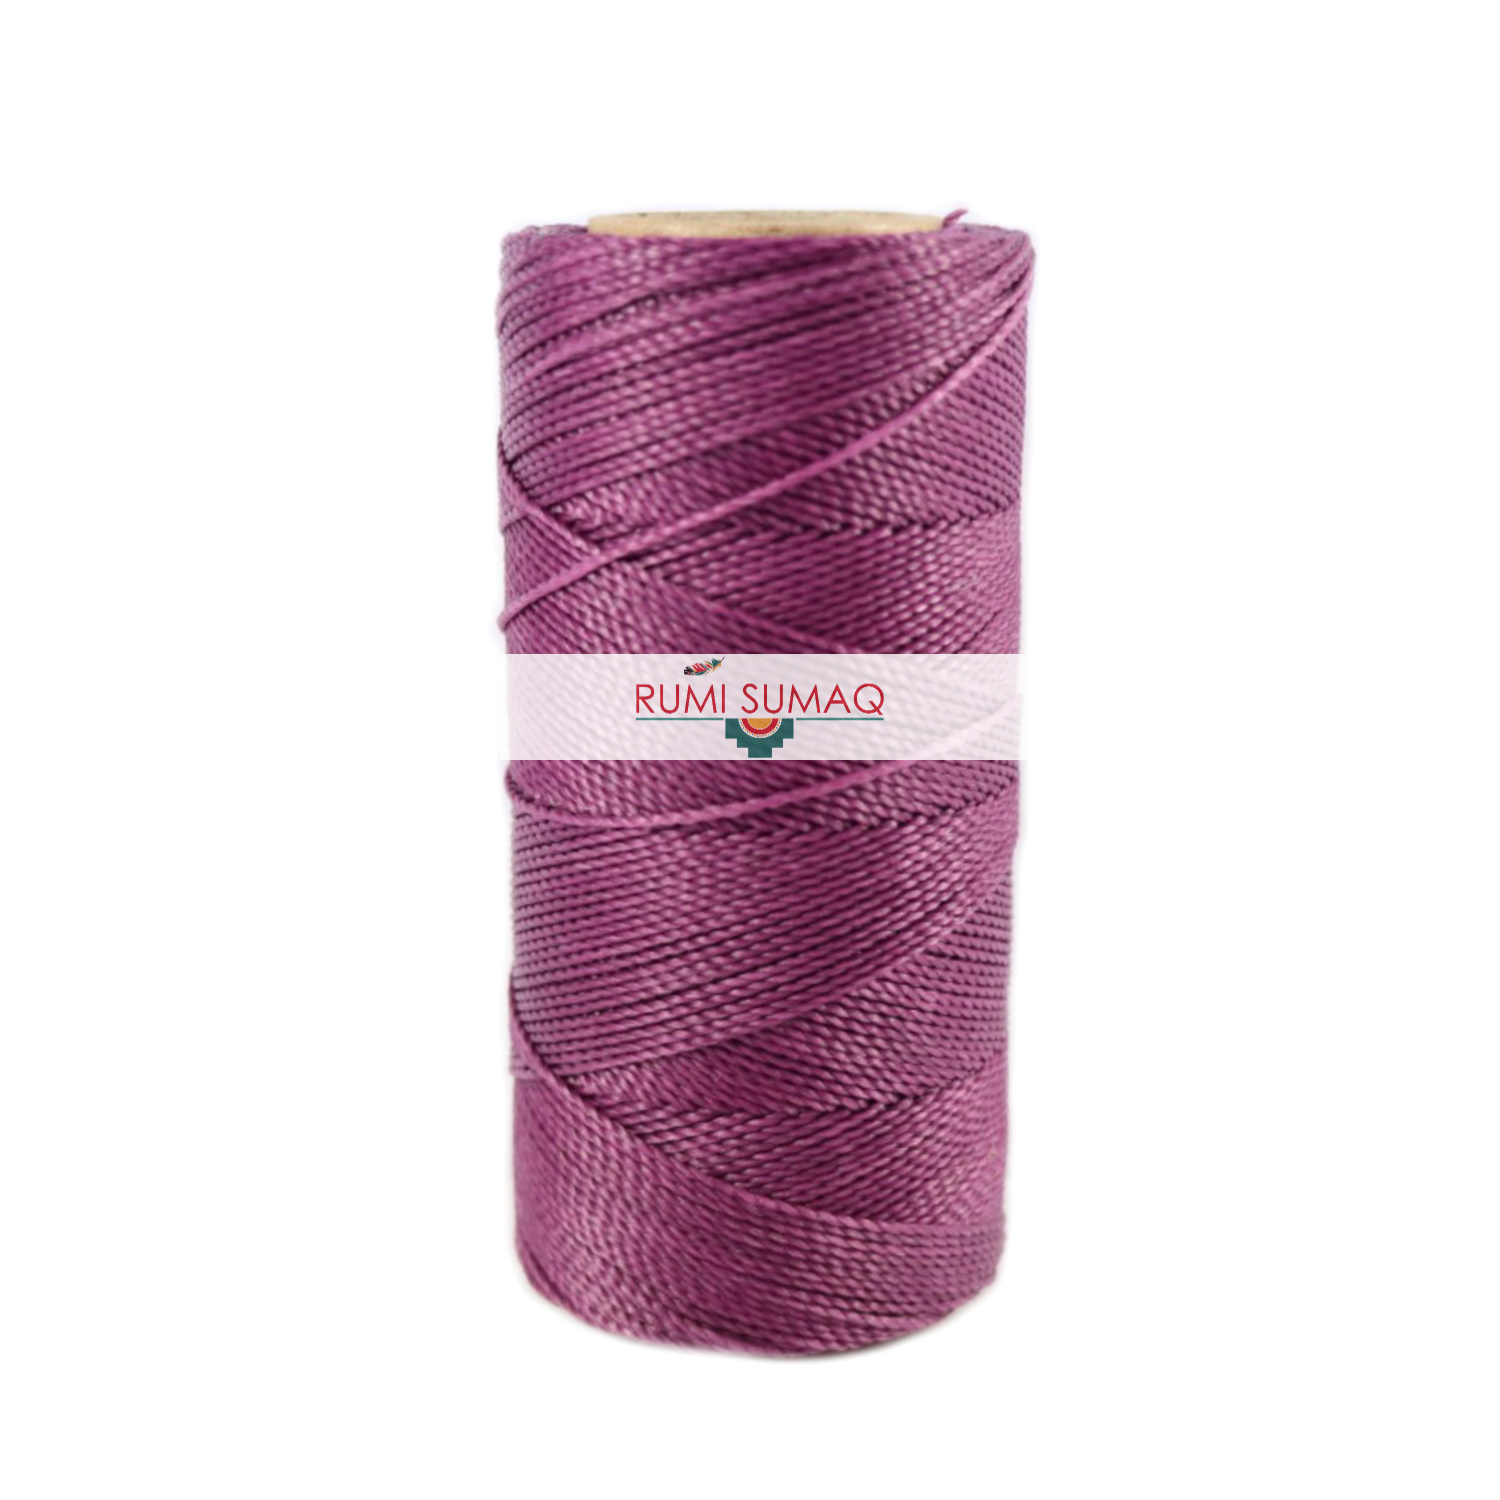 Find Linhasita 359 mauve 1mm waxed polyester cord at RUMI SUMAQ, the premier retailer for waxed thread for macrame, bead bracelets, hand-stitching, basketry